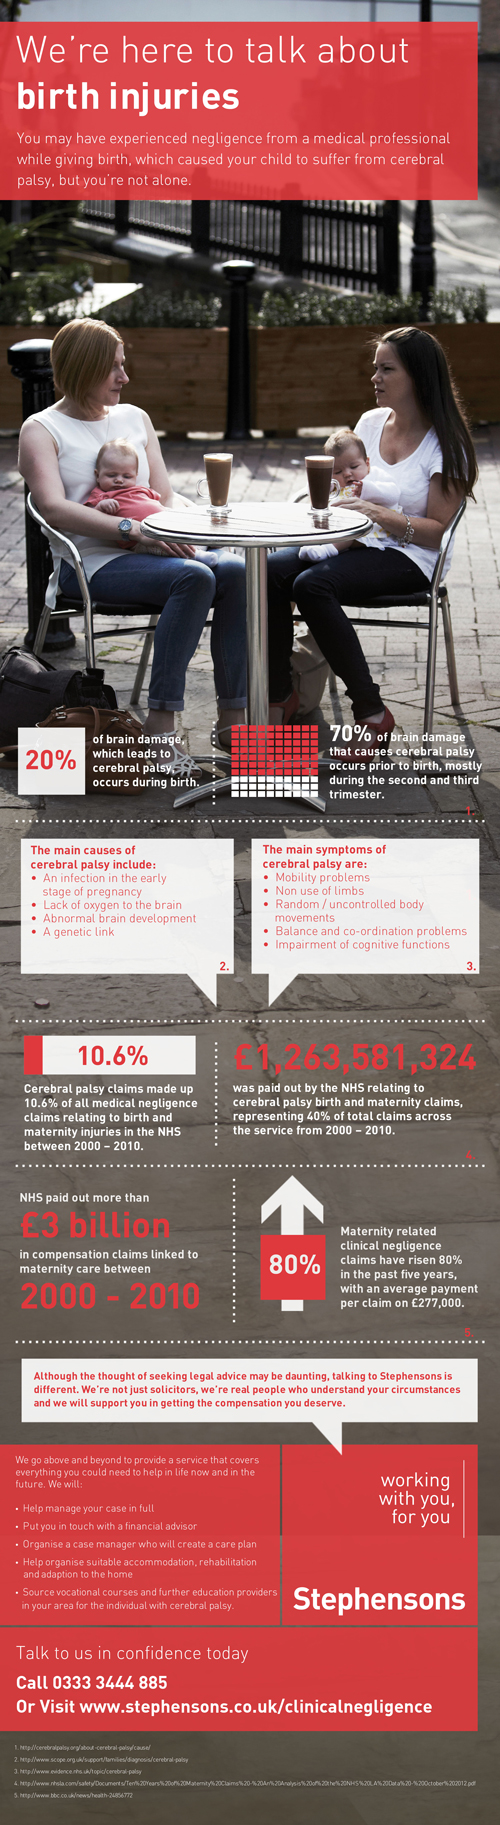 We're here to talk about birth injuries - Infographic